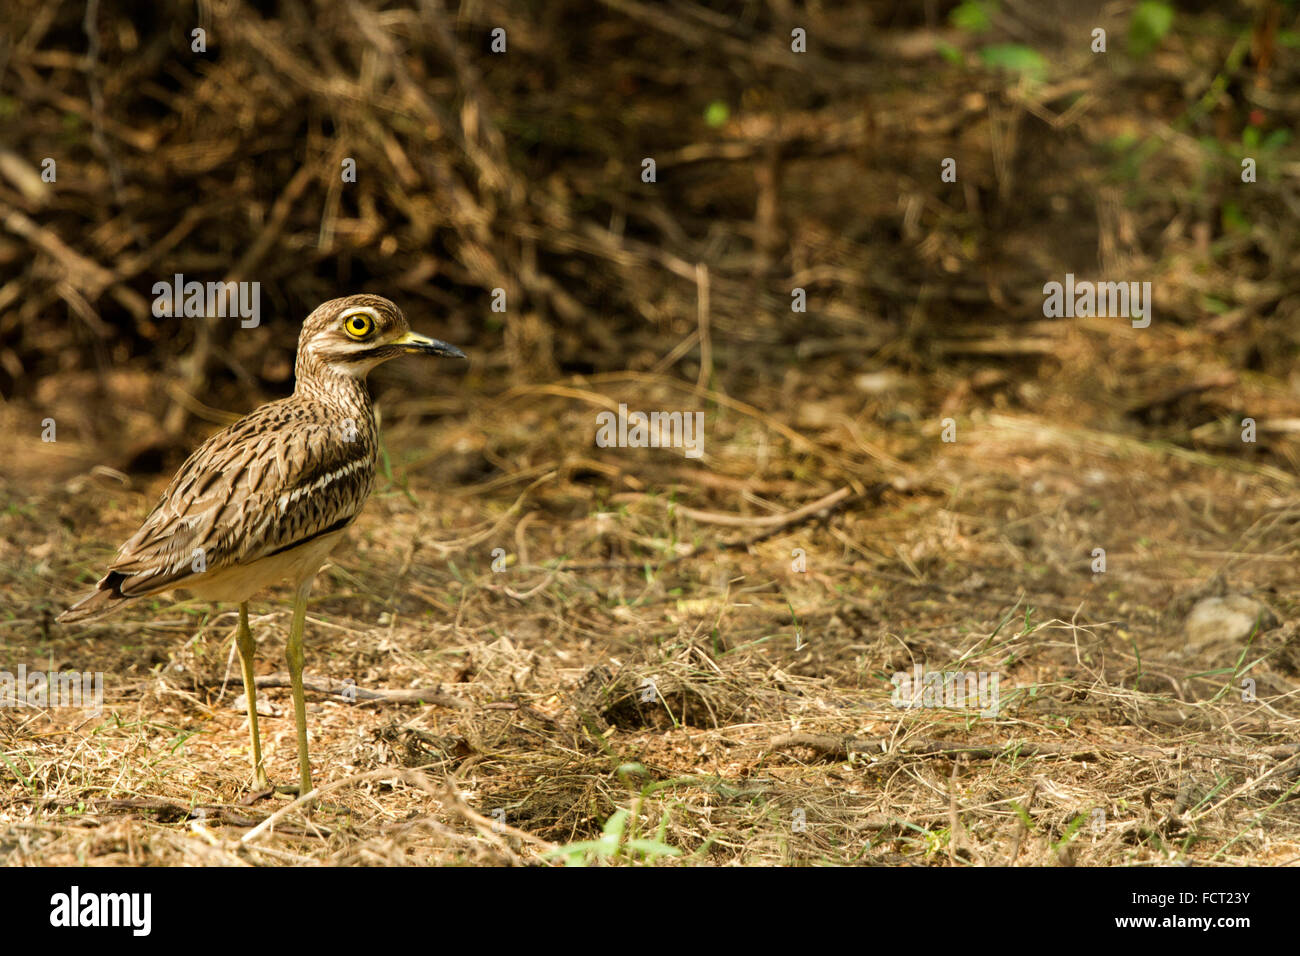 The Indian stone-curlew or Indian thick-knee (Burhinus indicus) is a species of bird in the family Burhinidae. Stock Photo